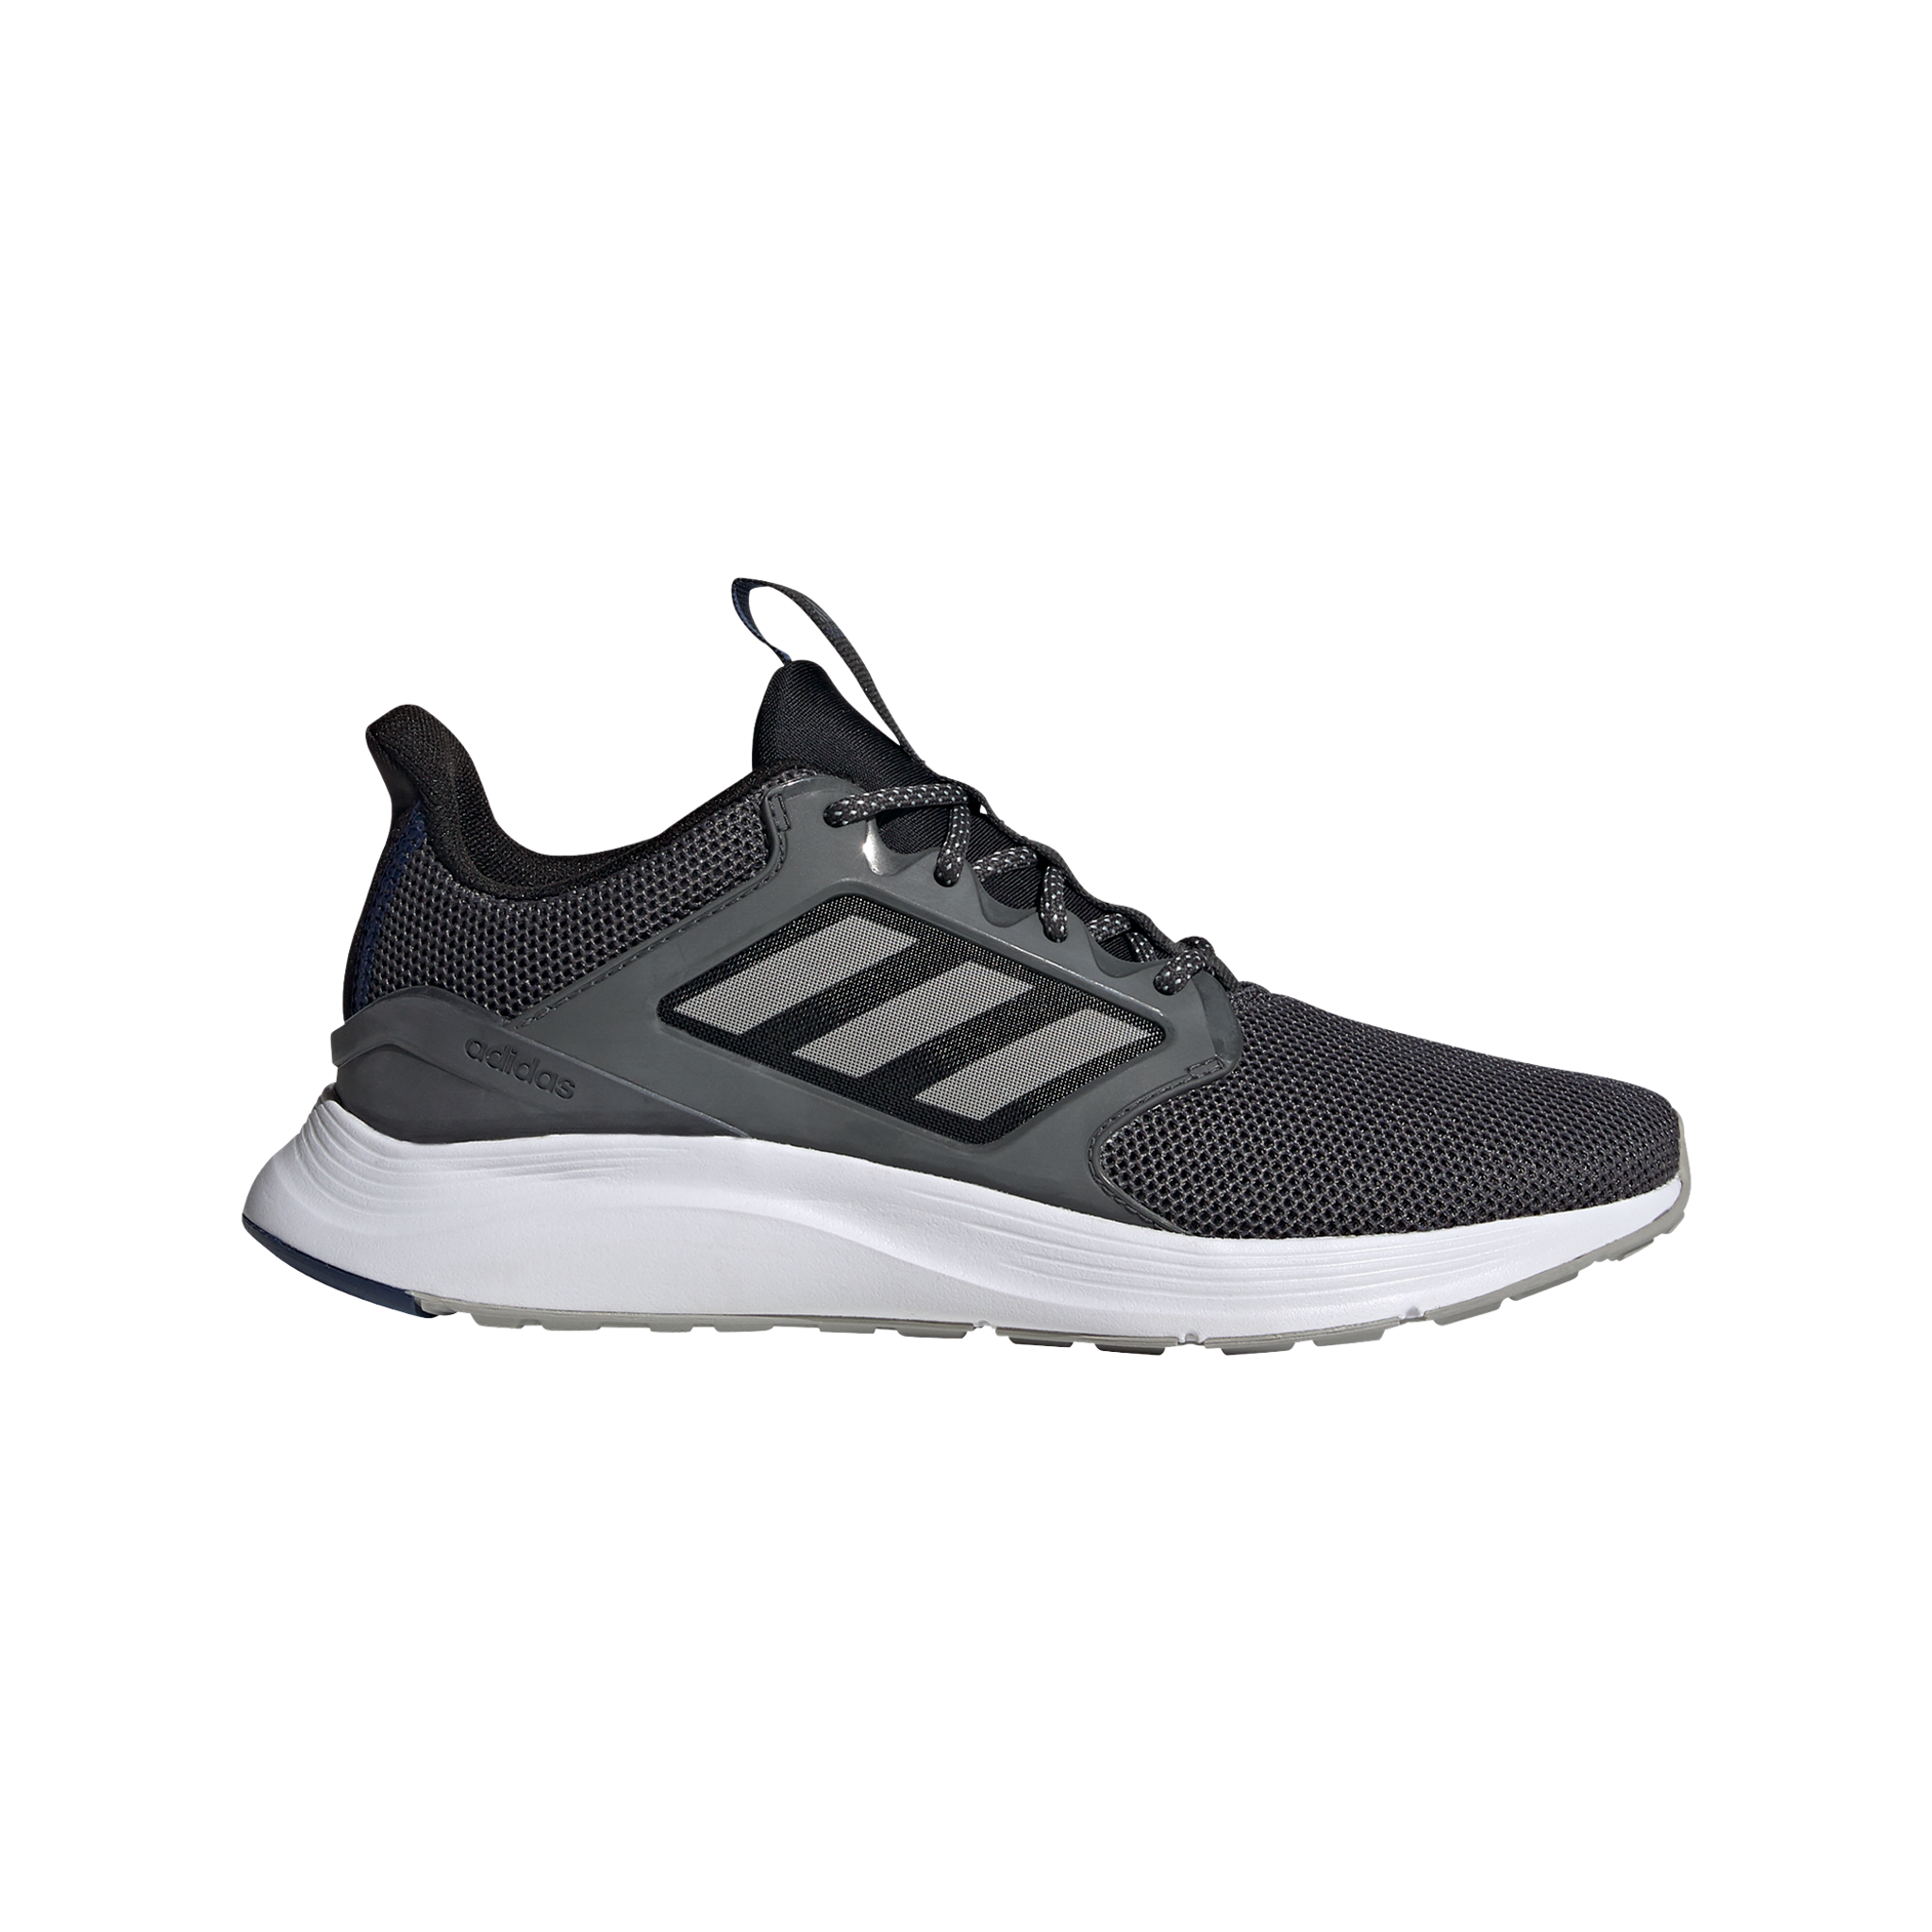 Egypte Onze onderneming planter Adidas Energy Falcon X Womens Running Shoes-FW4714 - KM Sports